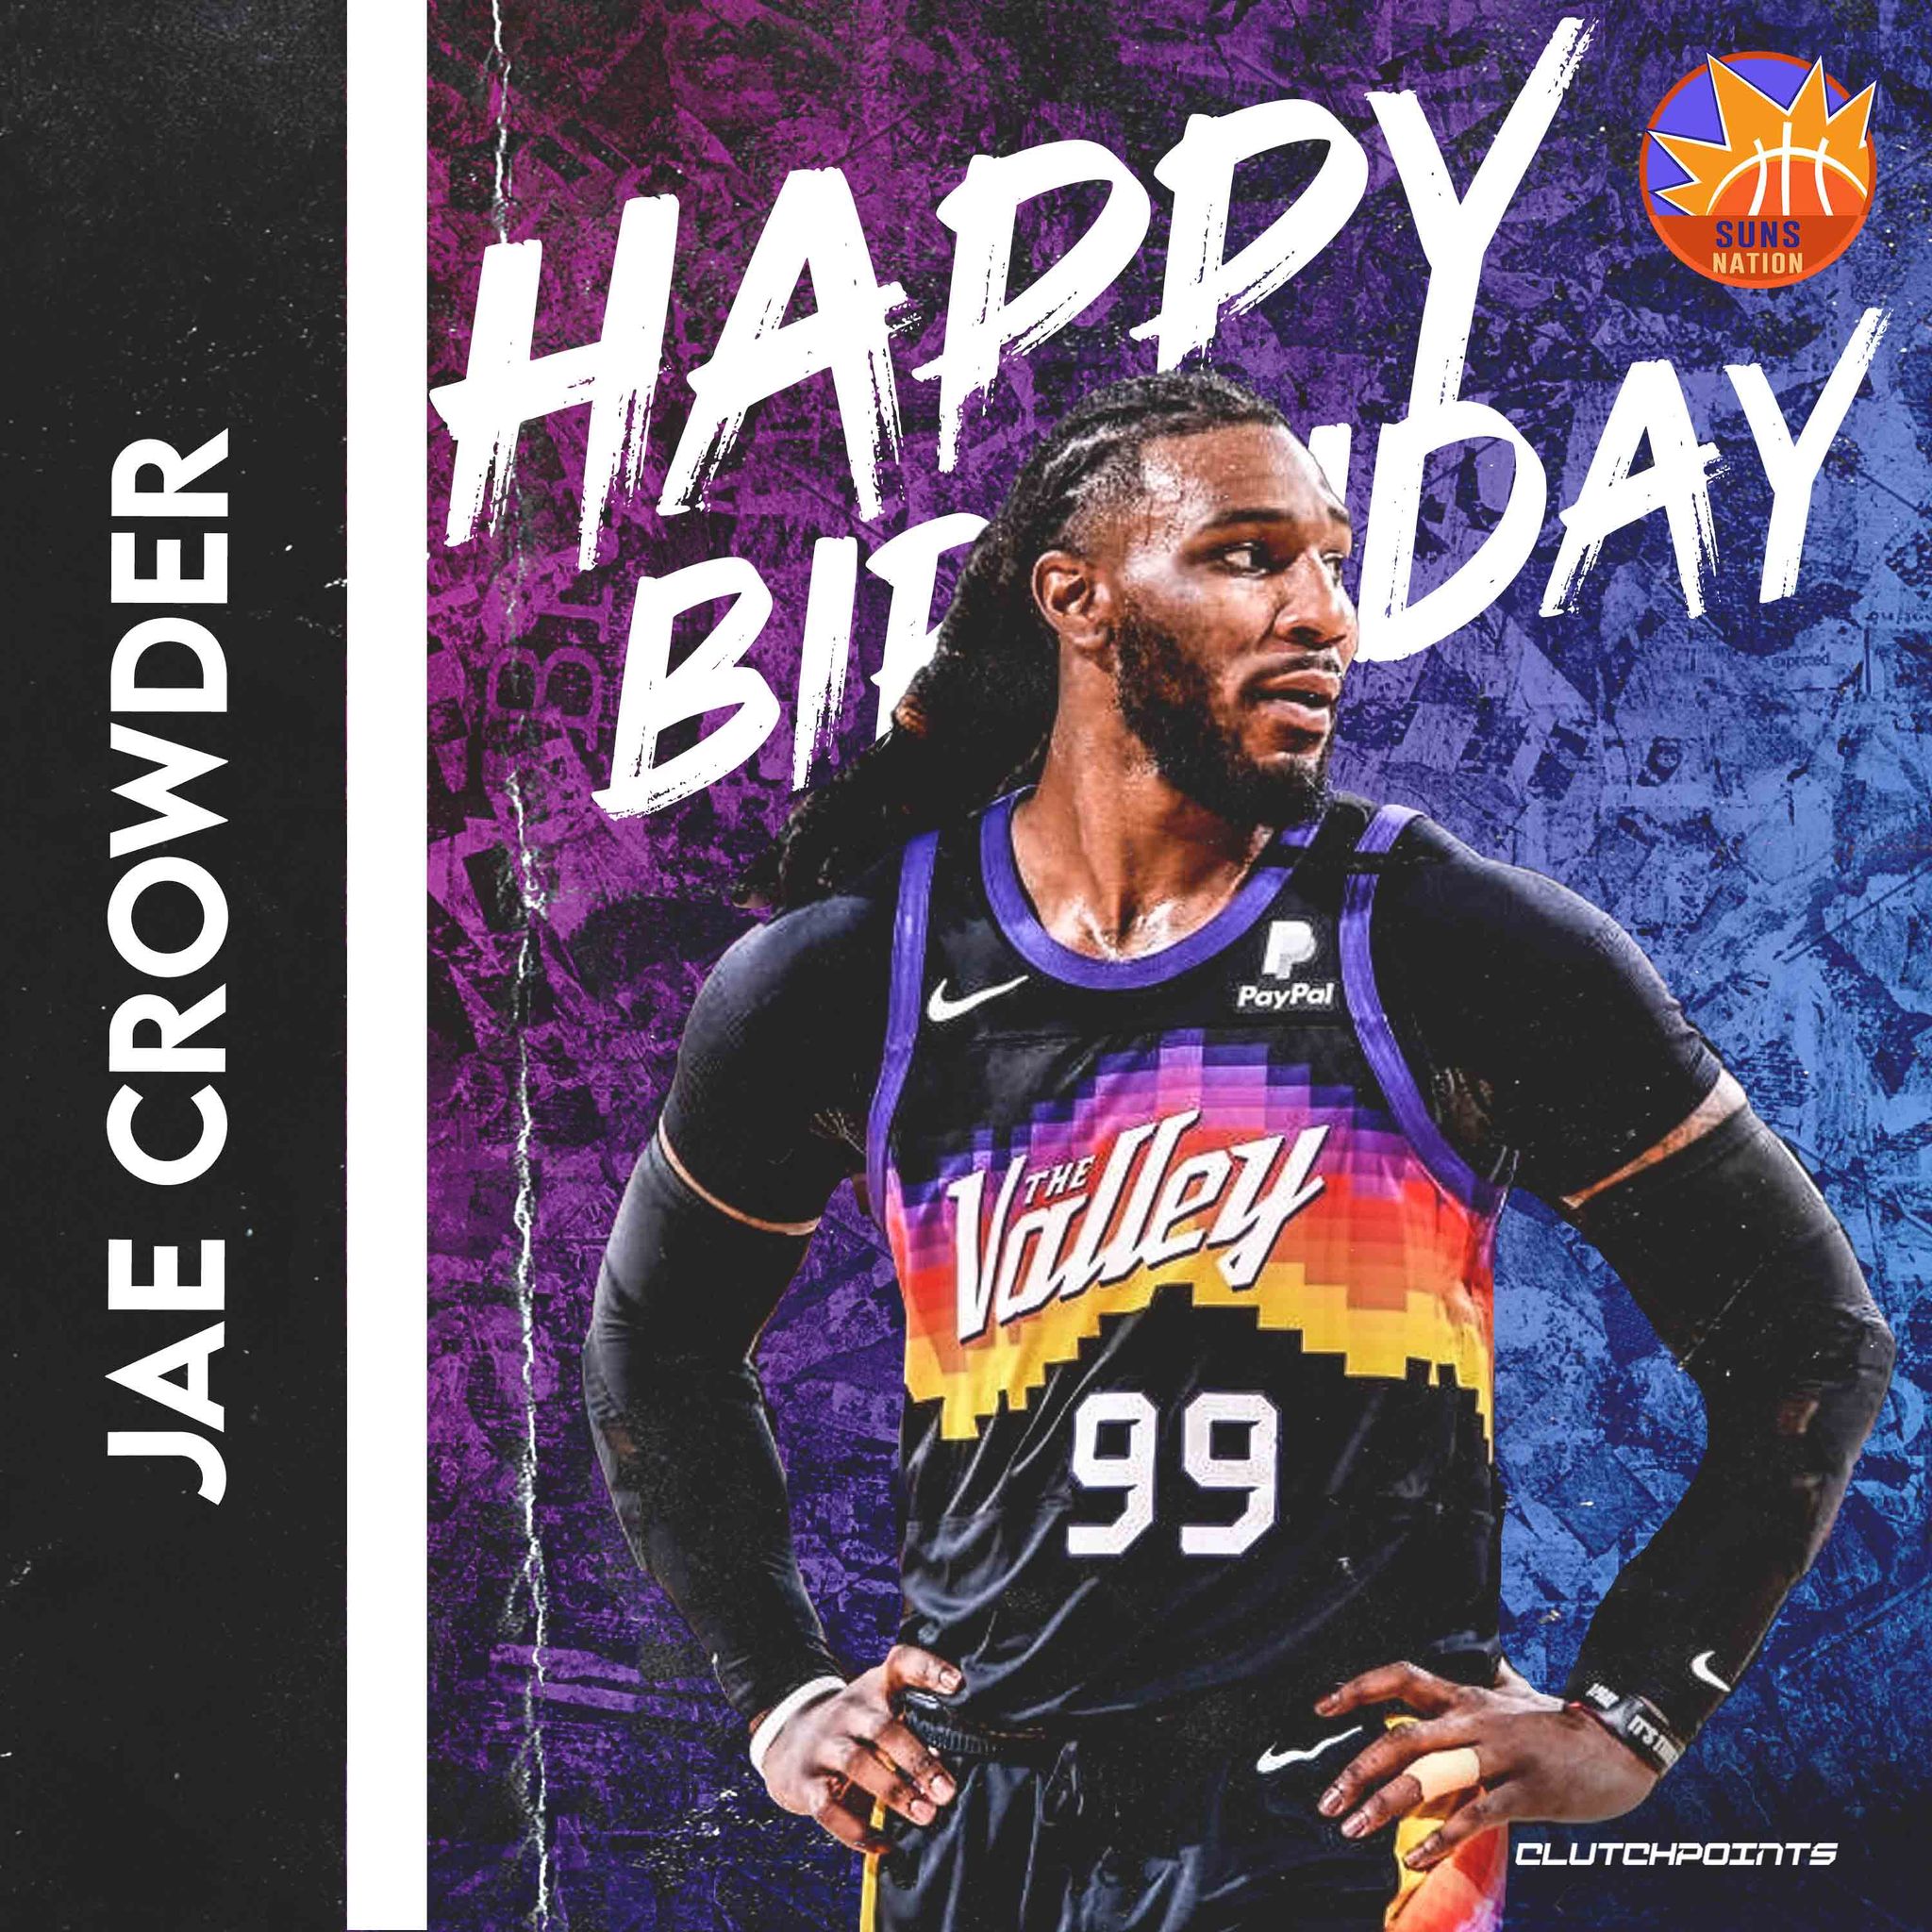 Join Suns Nation in wishing Jae Crowder a happy 31st birthday!  